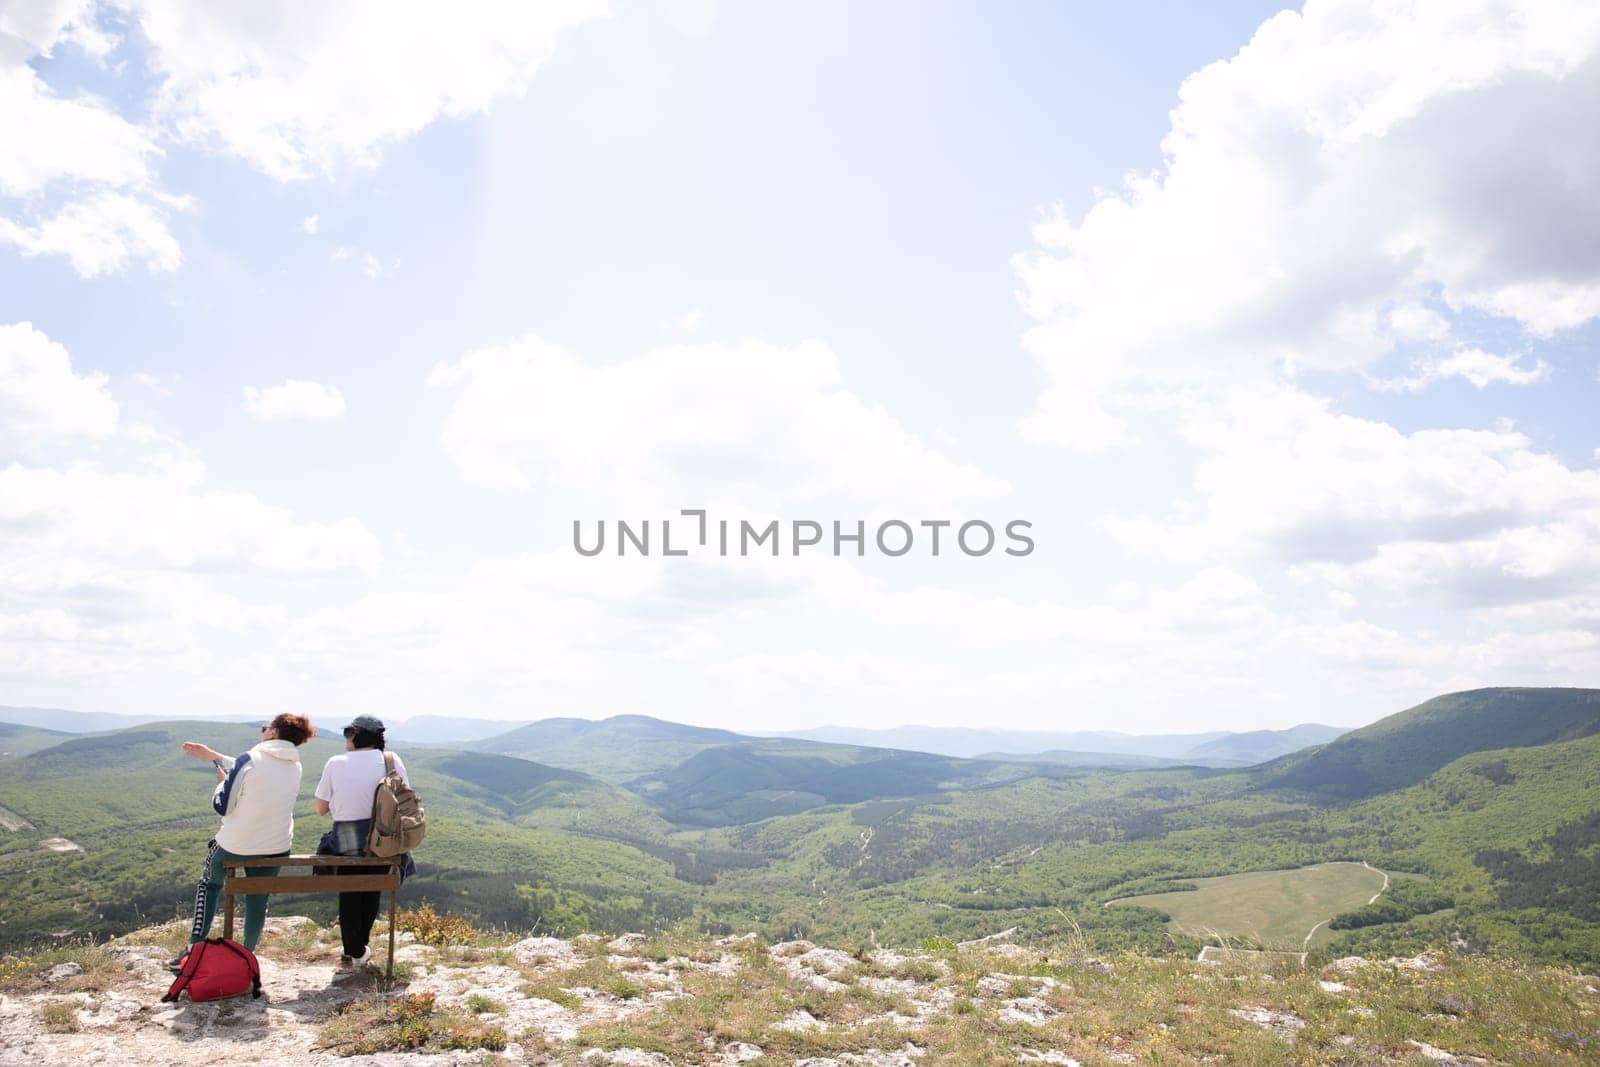 two people sitting on a bench on a mountain hiking journey nature by Simakov